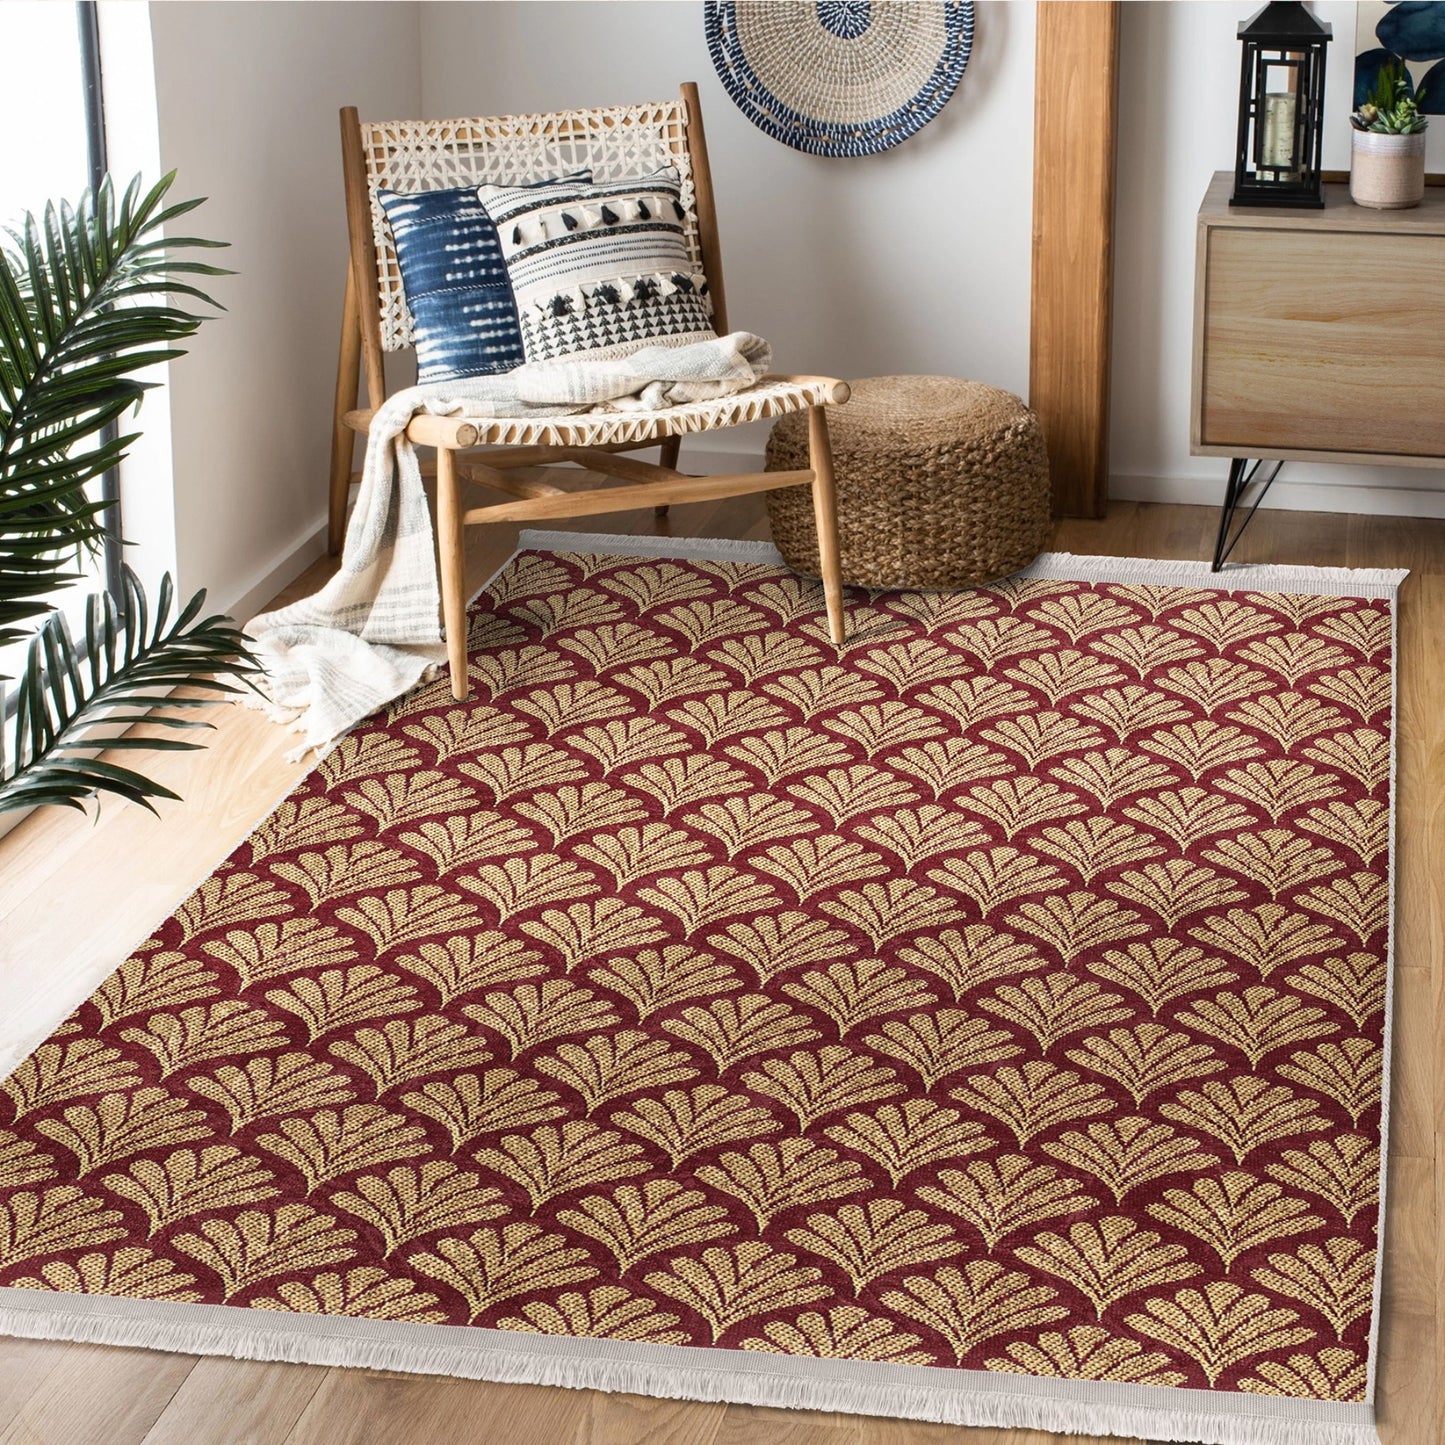 Luxurious Rug with Elegant Leaf Pattern and Gold Motif